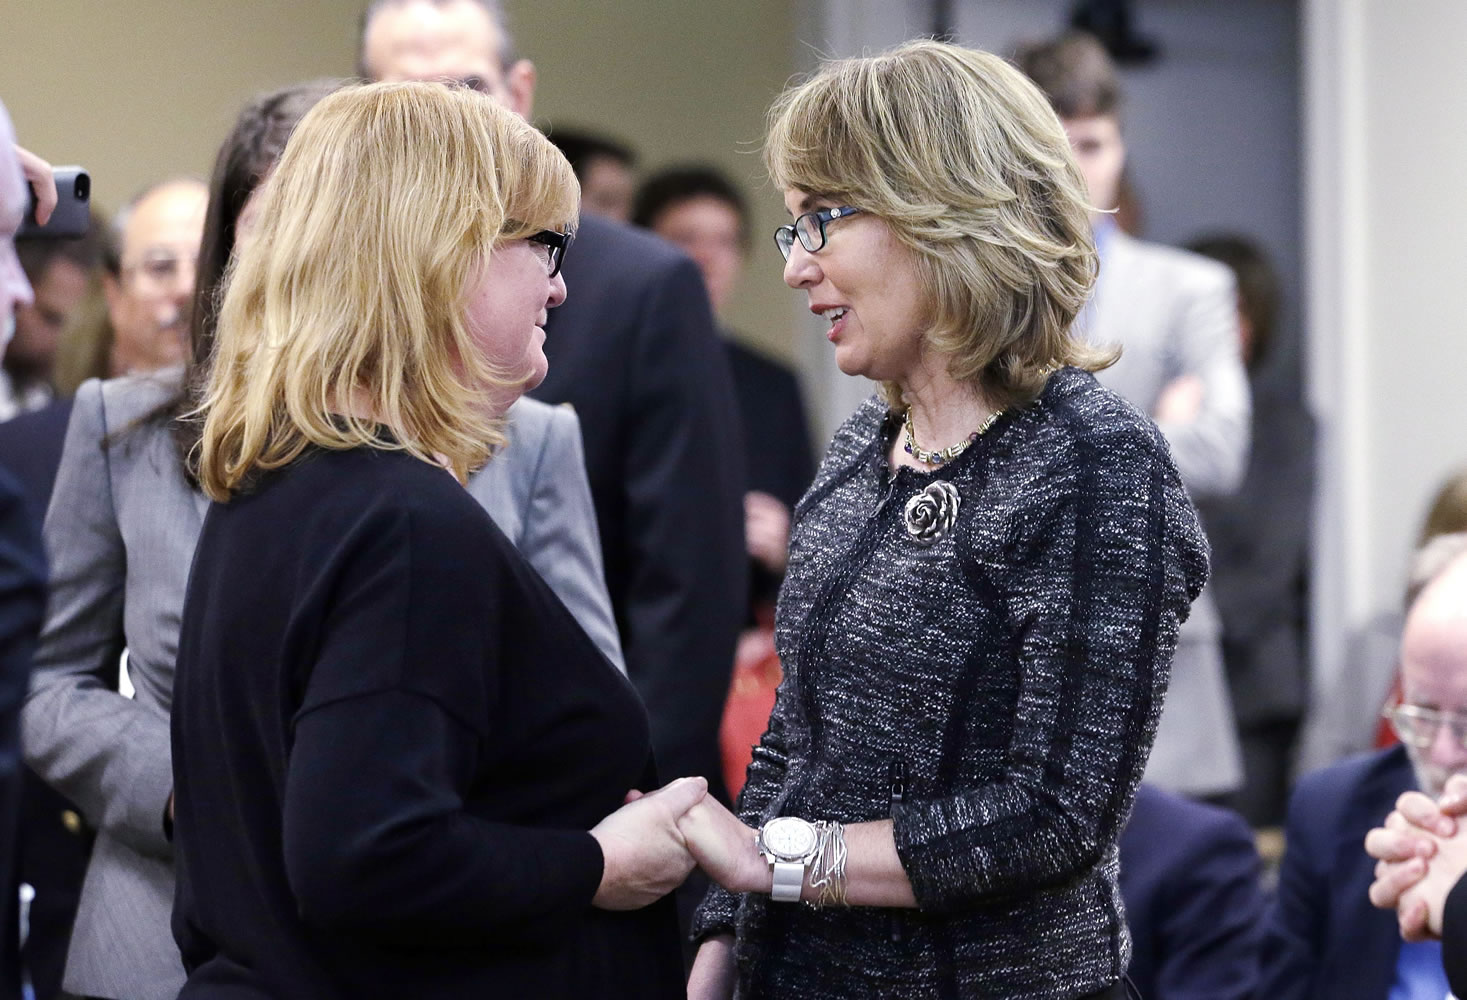 Former Arizona Congresswoman Gabrielle Giffords, right, greets Cheryl Stumbo, who, like Giffords, survived being shot, after both testified before a Washington state House panel Tuesday in Olympia.